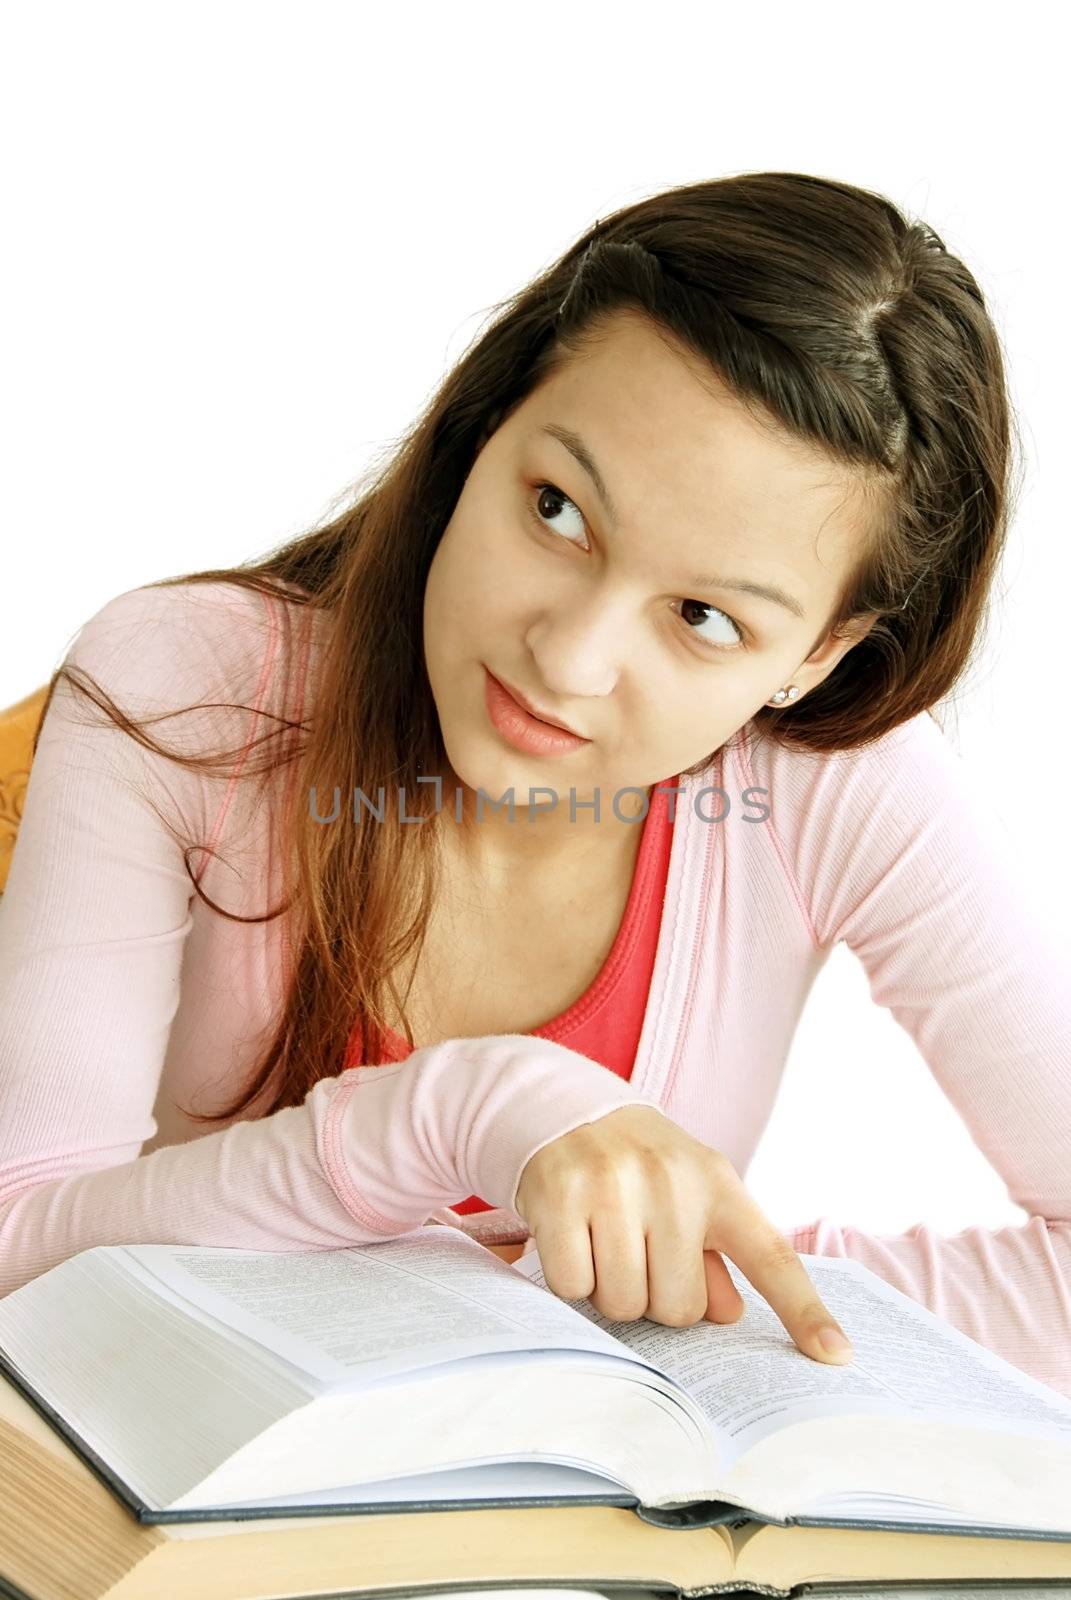 teenage girl portrait with arm on opened book, looking at side